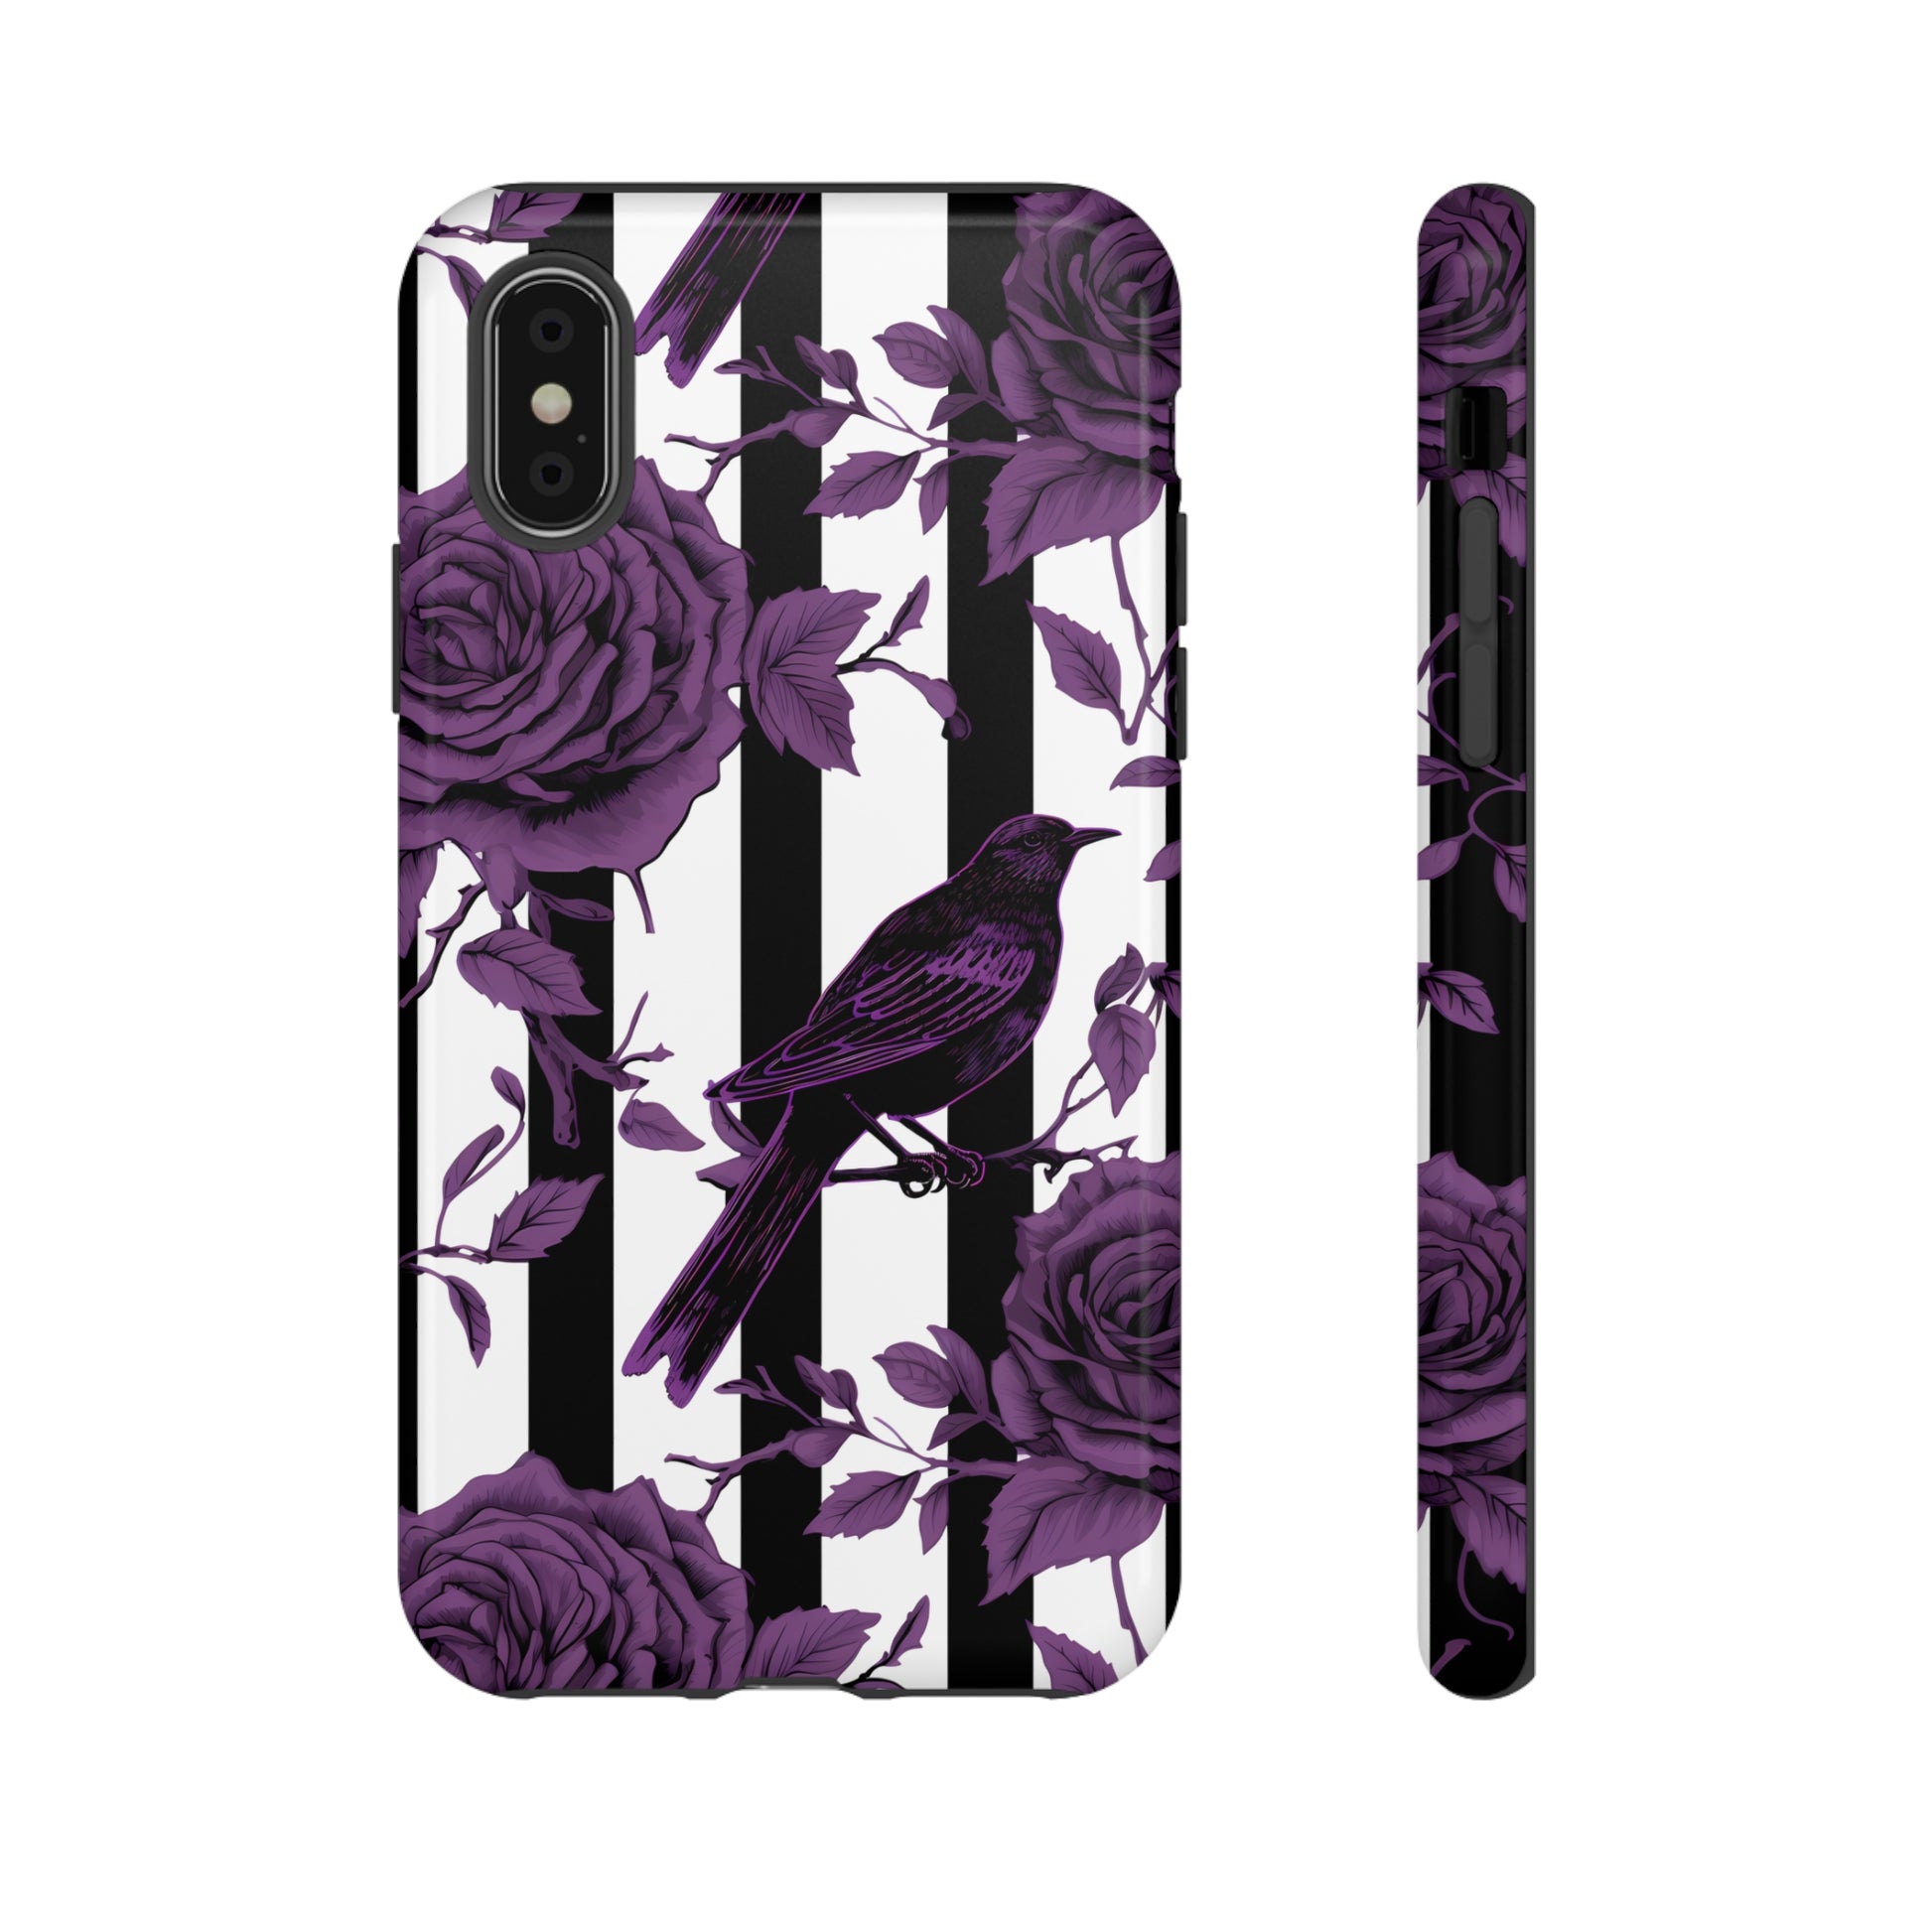 Striped Crows and Roses Tough Cases for iPhone Samsung Google PhonesPhone CaseVTZdesignsiPhone XSGlossyAccessoriescrowsGlossy